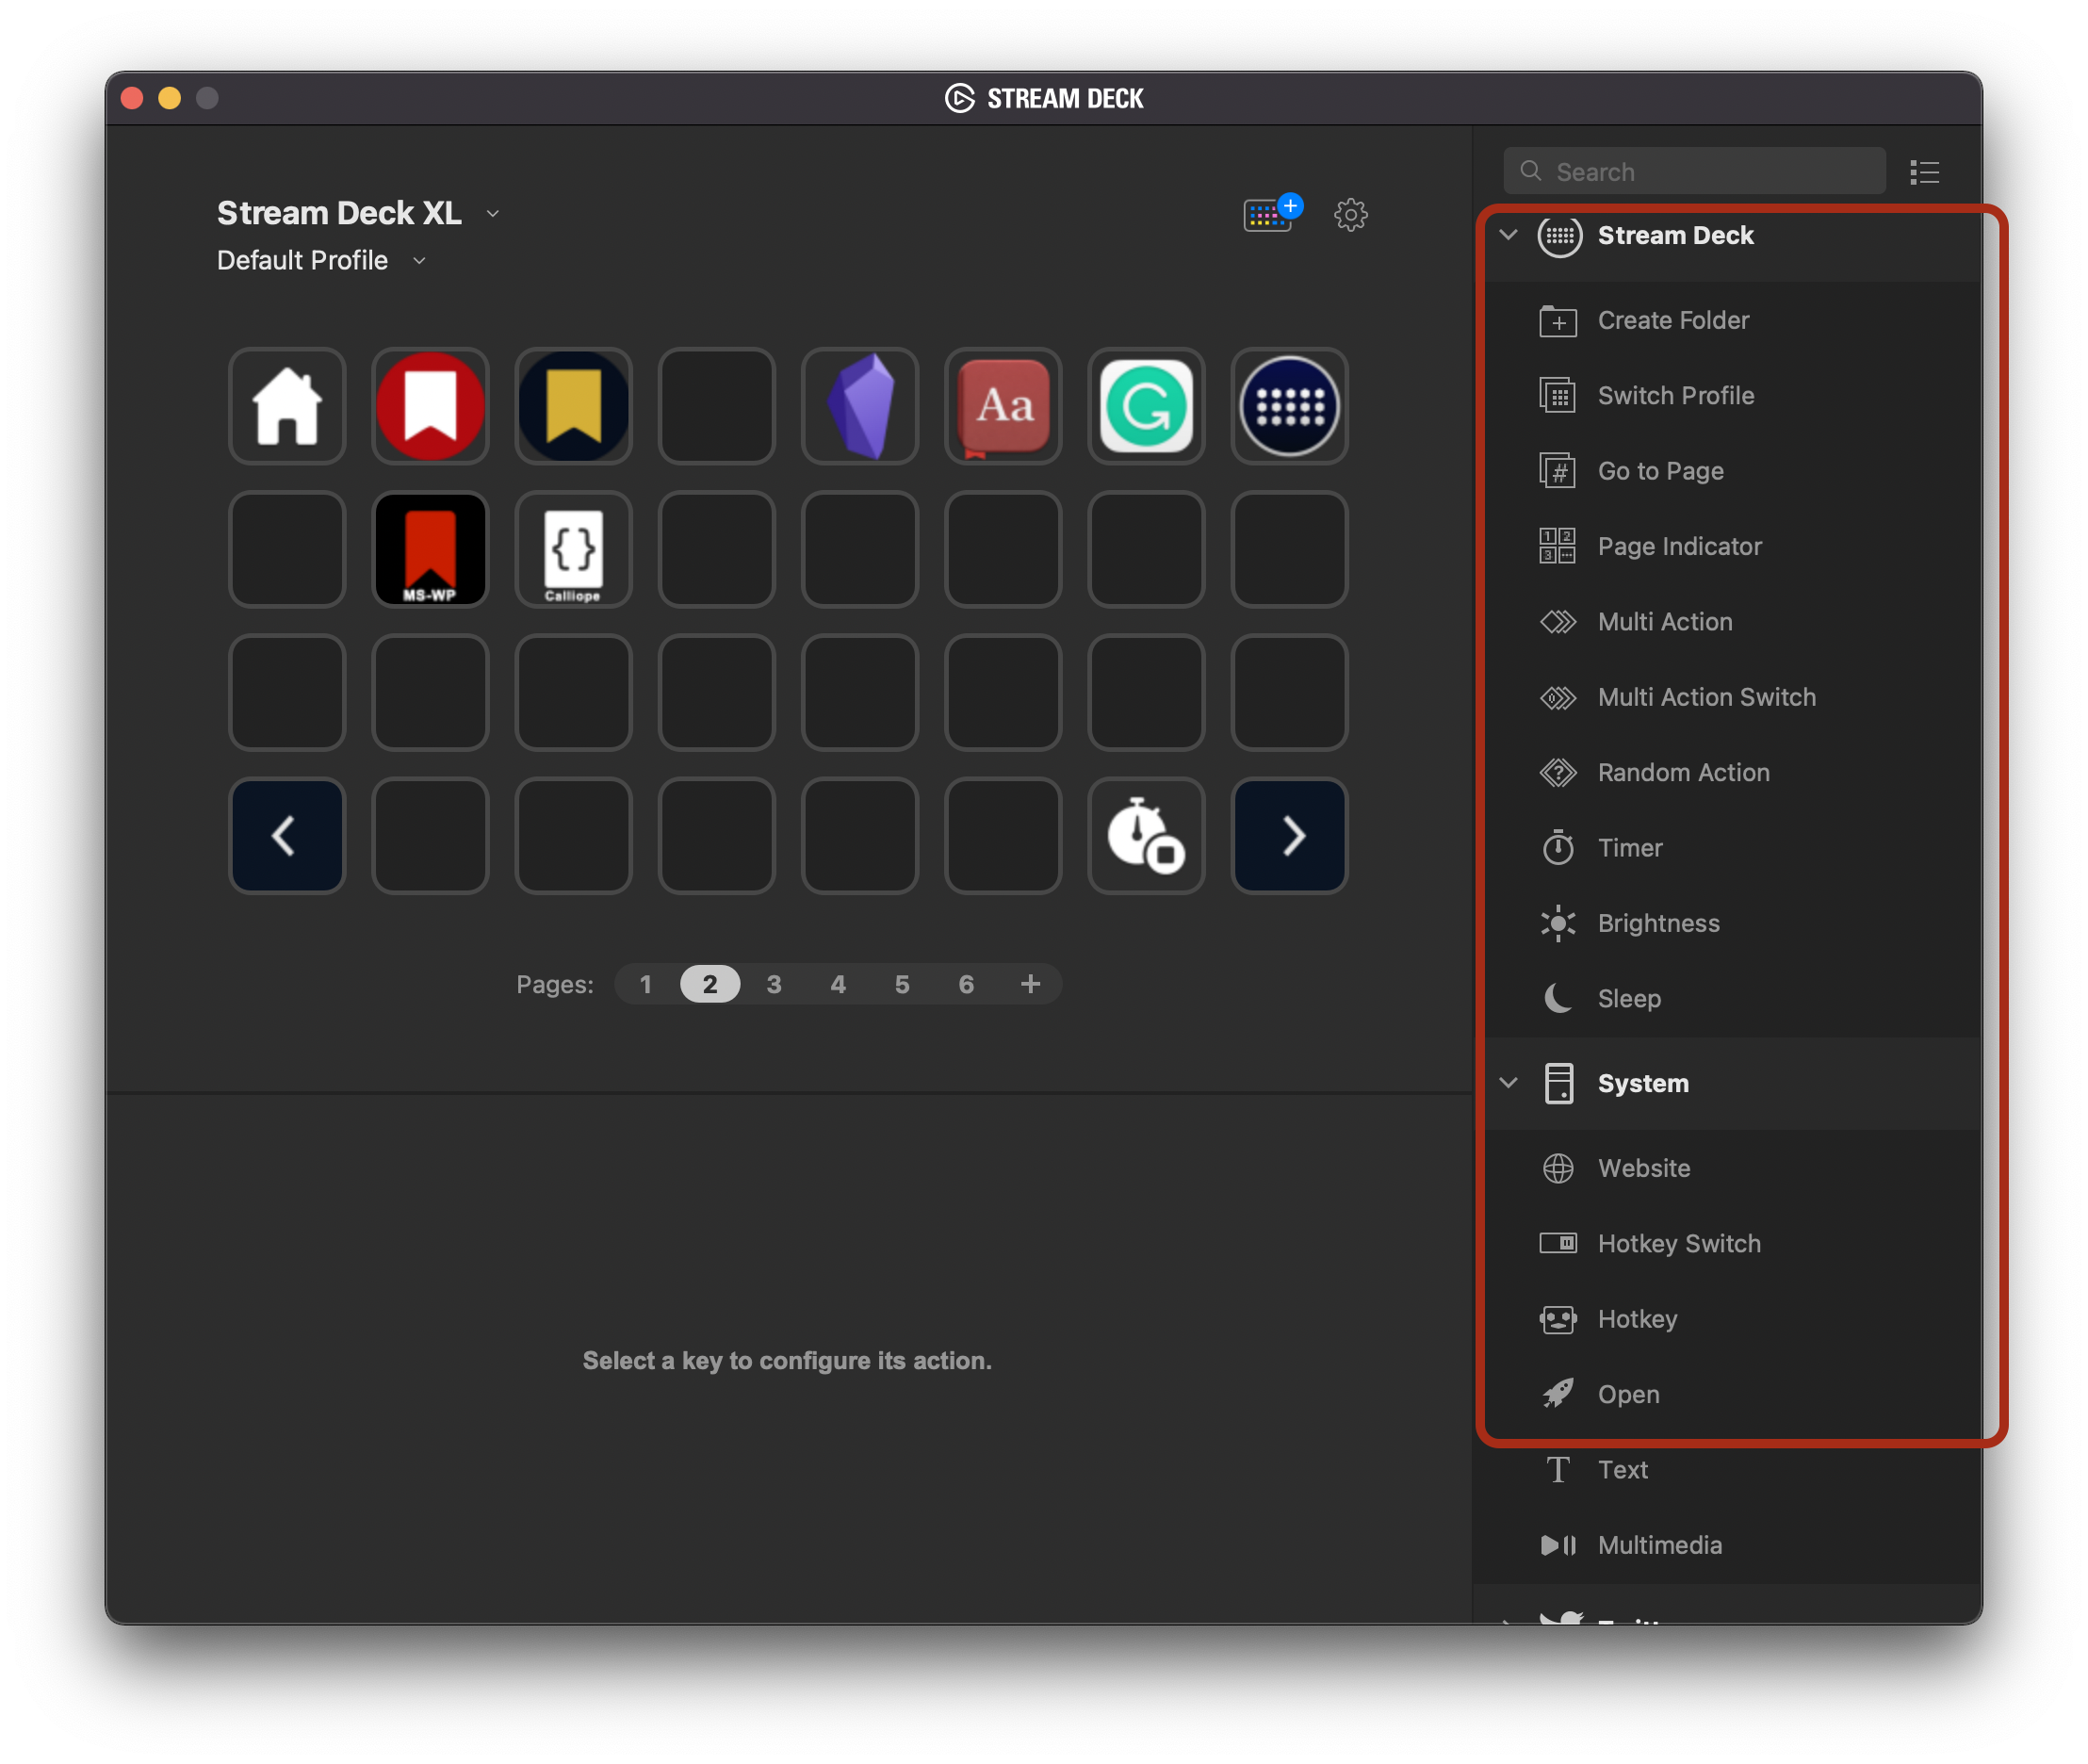 Most of the actions you need are in just two sections of the Stream Deck app's sidebar.